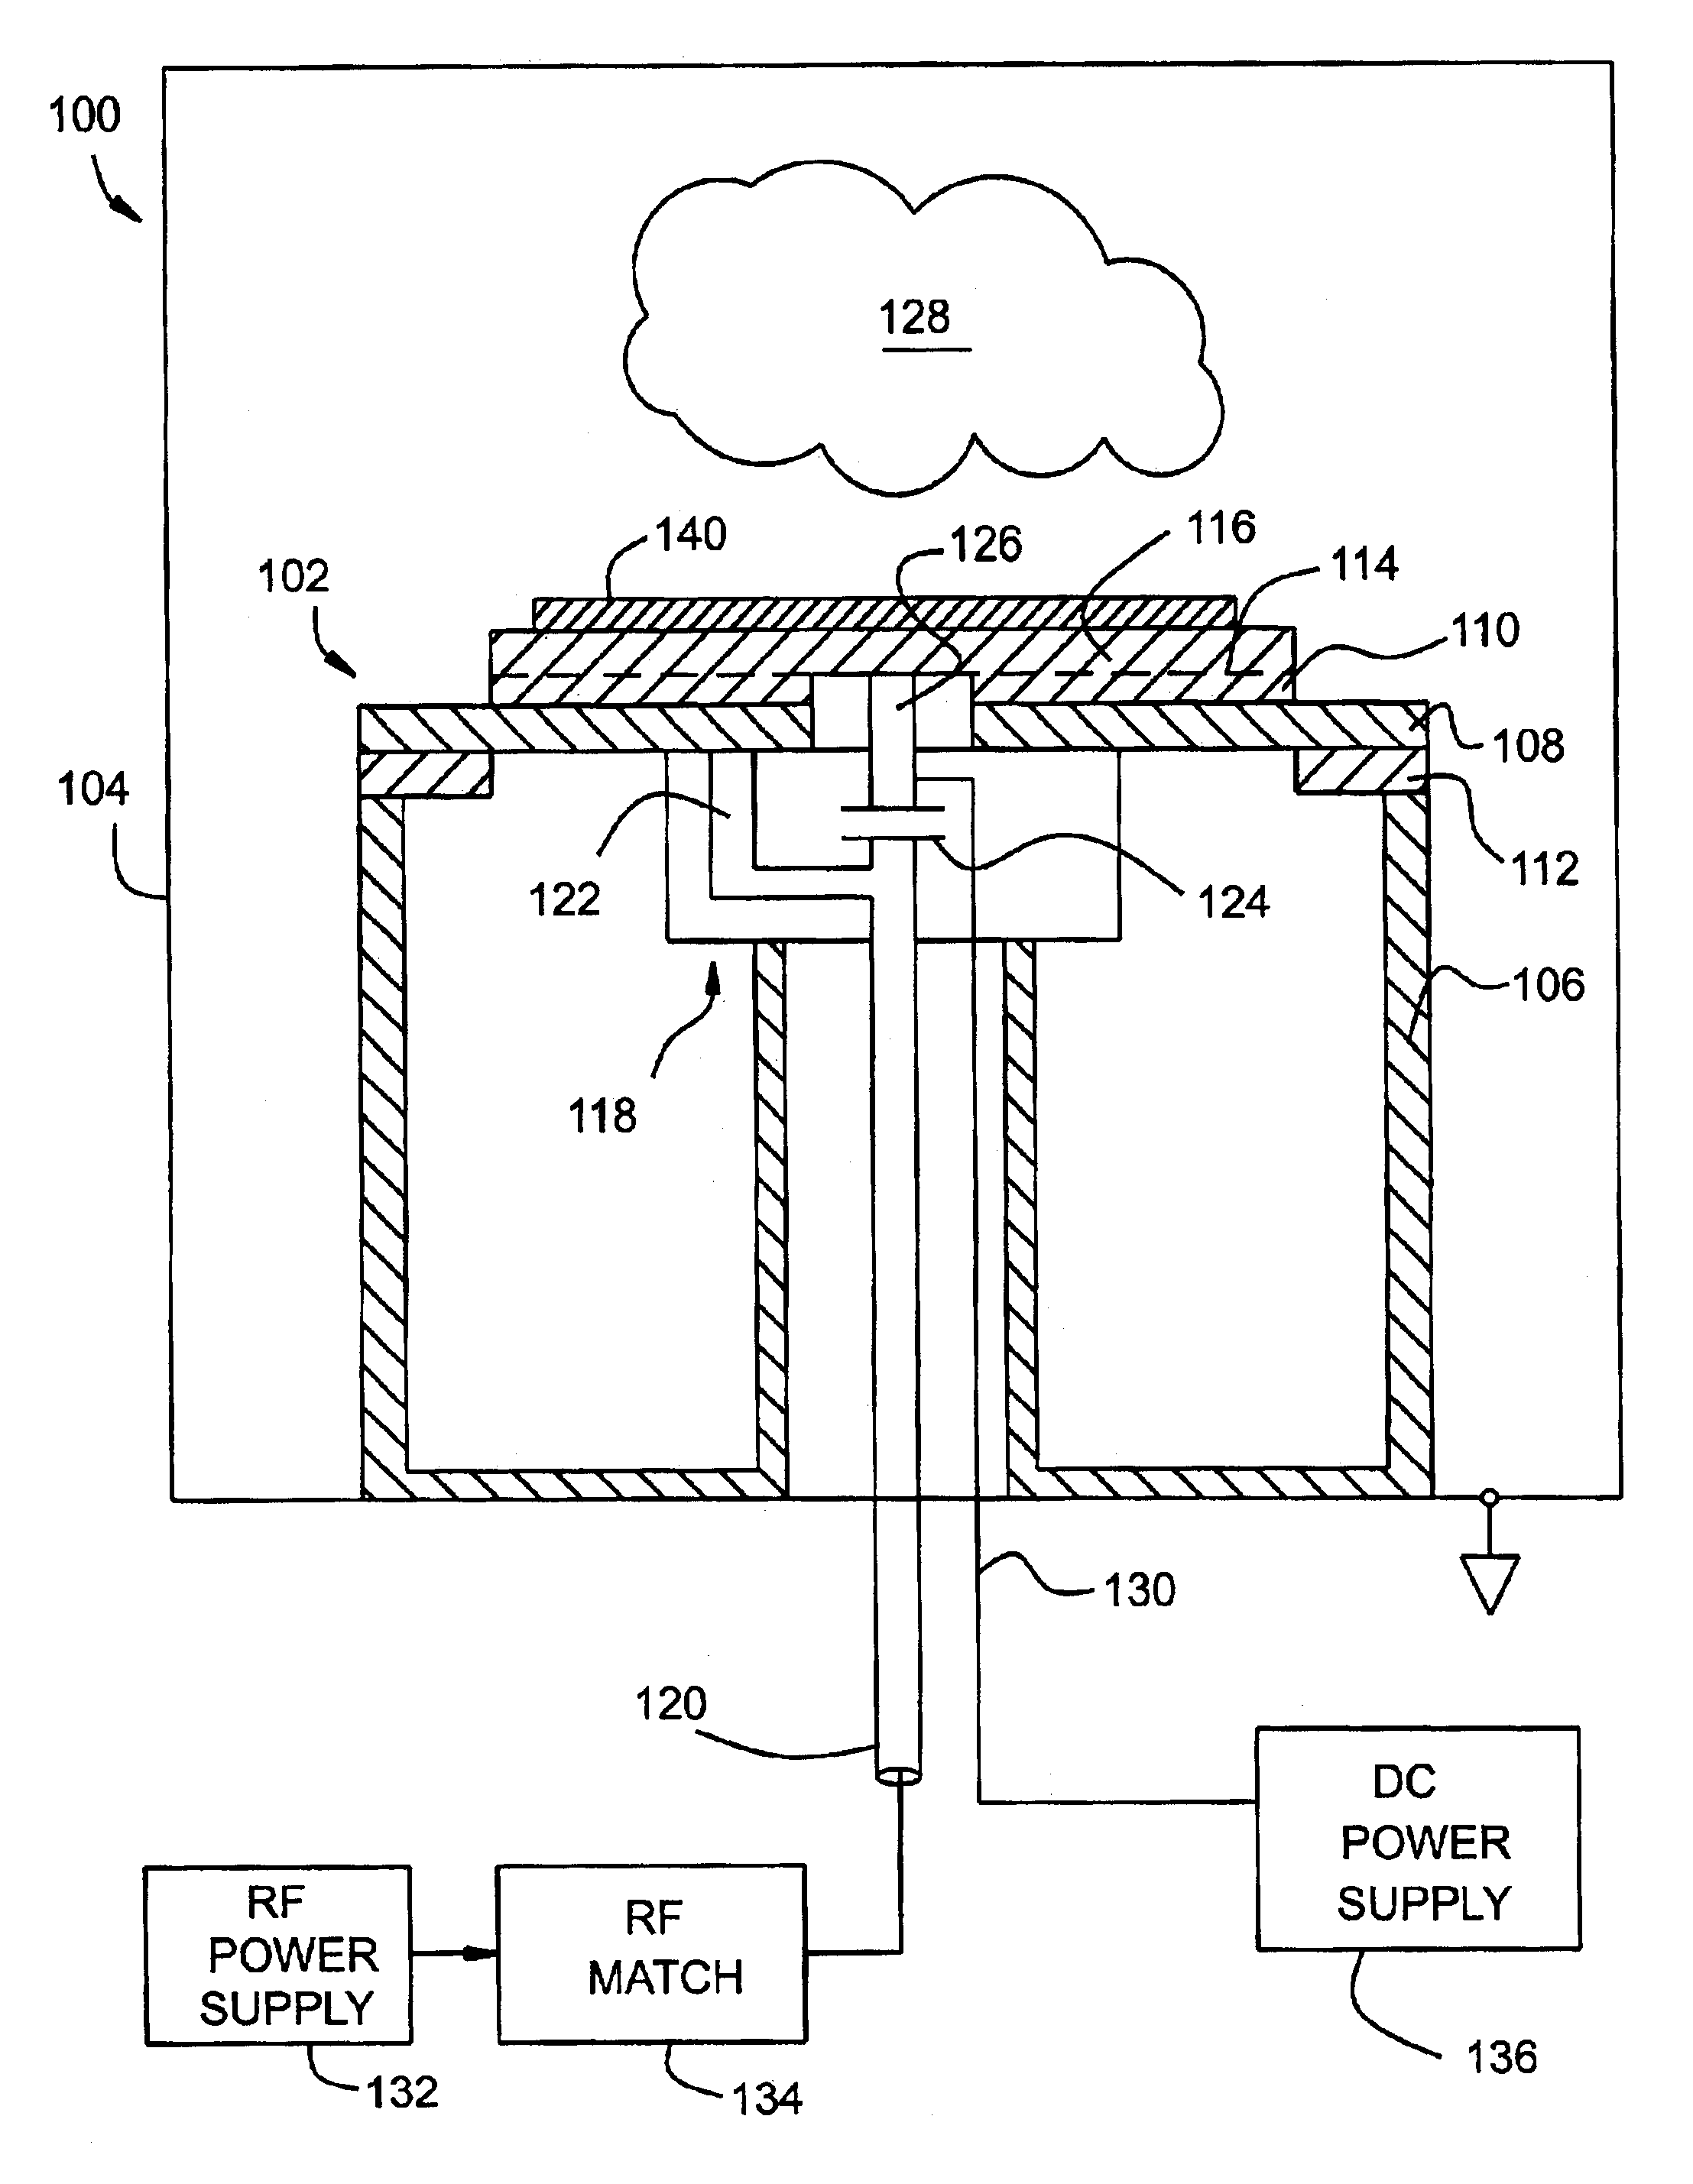 Method and apparatus for routing harmonics in a plasma to ground within a plasma enhanced semiconductor wafer processing chamber